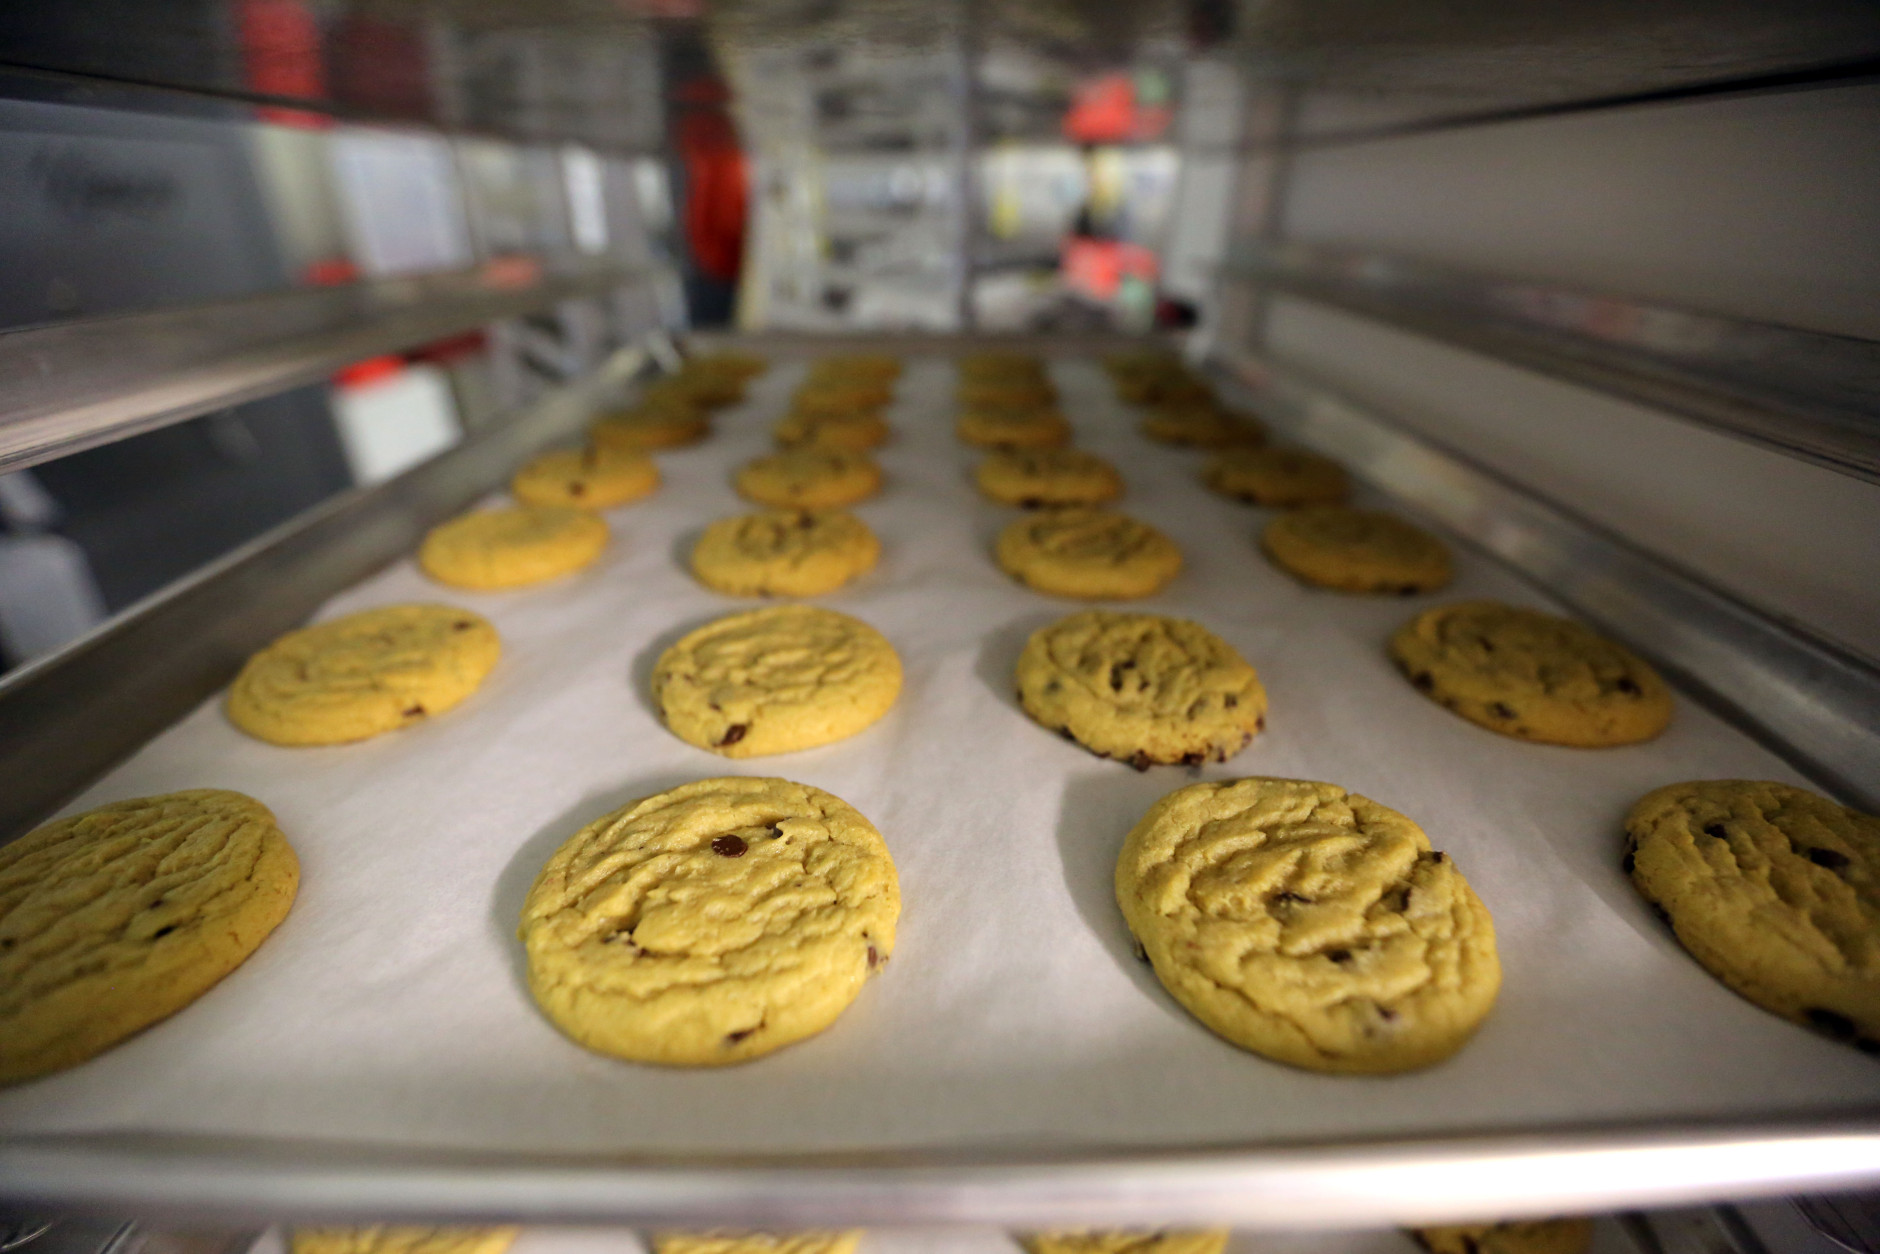 In this June 19, 2014 photo, freshly baked cannabis-infused cookies cool on a rack inside Sweet Grass Kitchen, a well-established gourmet marijuana edibles bakery which sells its confections to retail outlets, in Denver. Sweet Grass Kitchen, like other cannabis food producers in the state, is held to rigorous health inspection standards, and has received praise from inspectors, according to owner Julie Berliner. (AP Photo/Brennan Linsley)